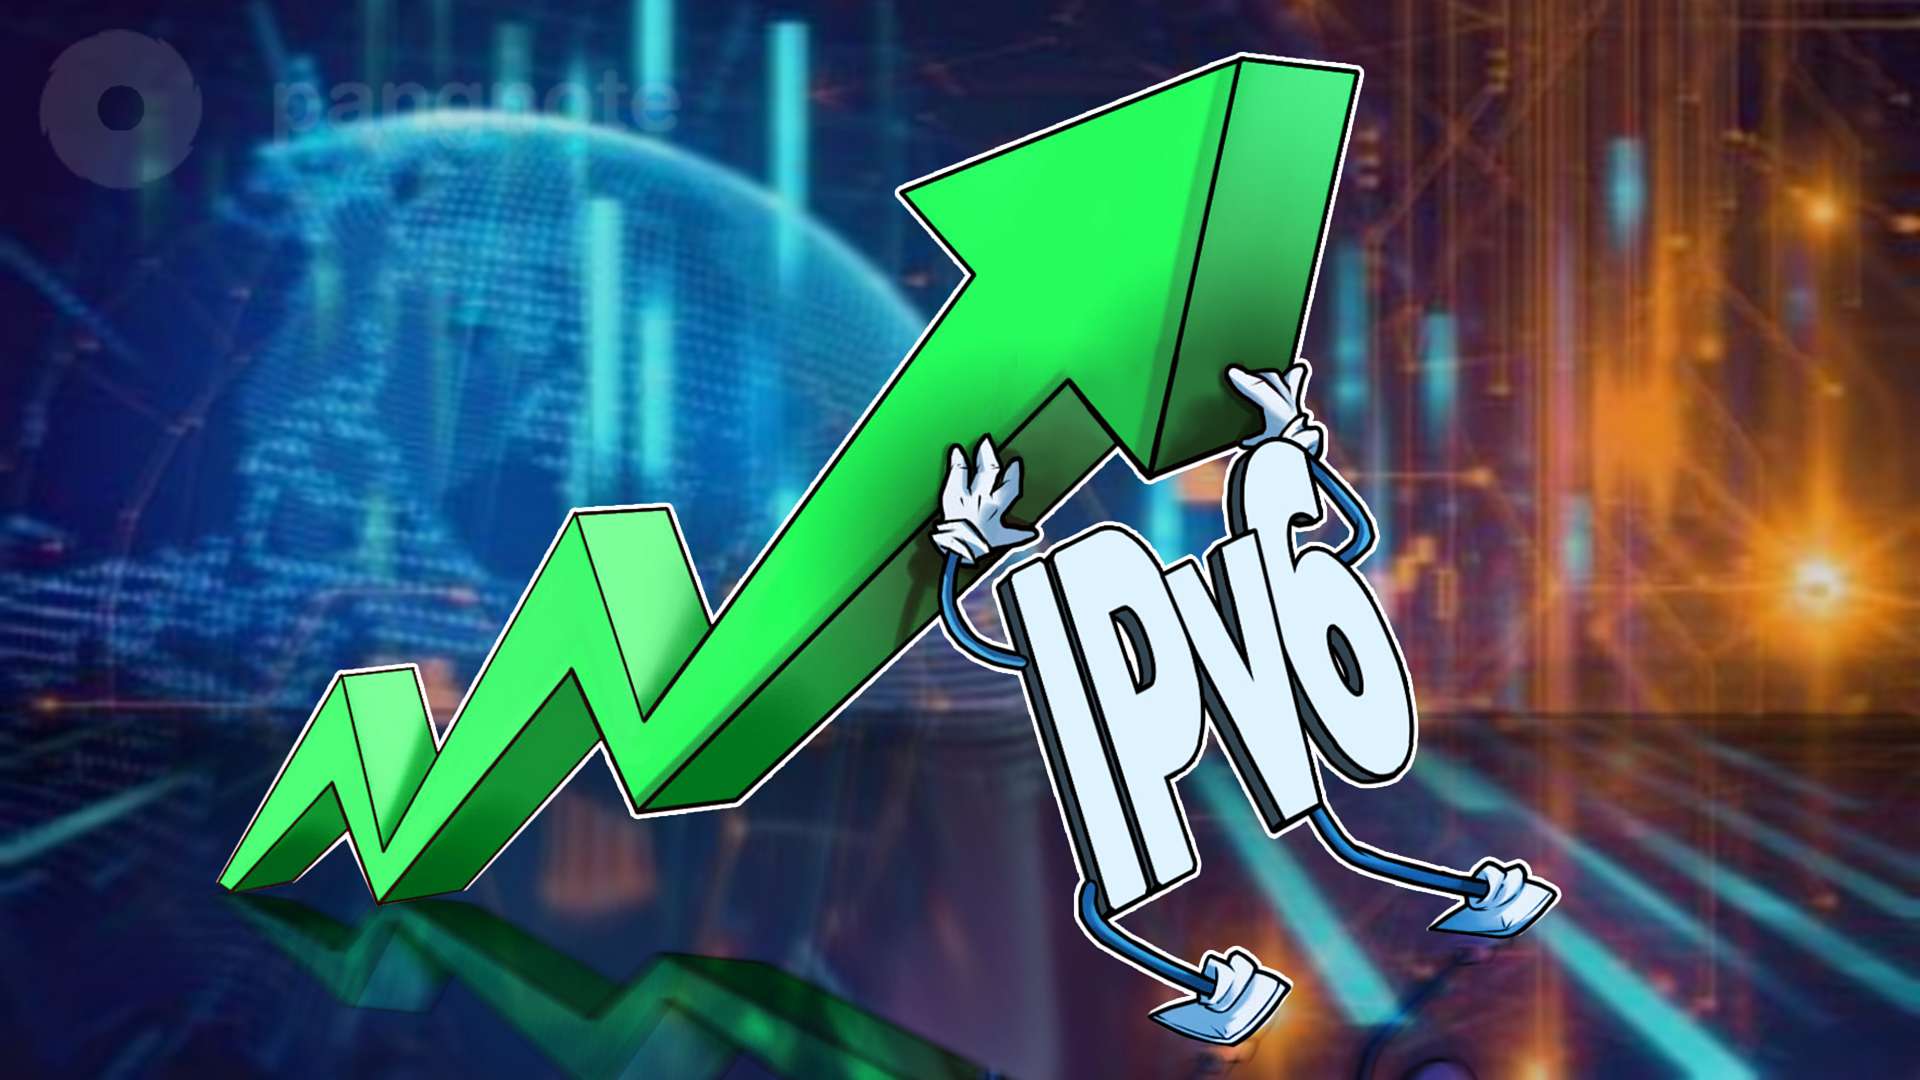 The rise in popularity of IPv6 has not caught up with the size of the critical mass to concur with IPv4